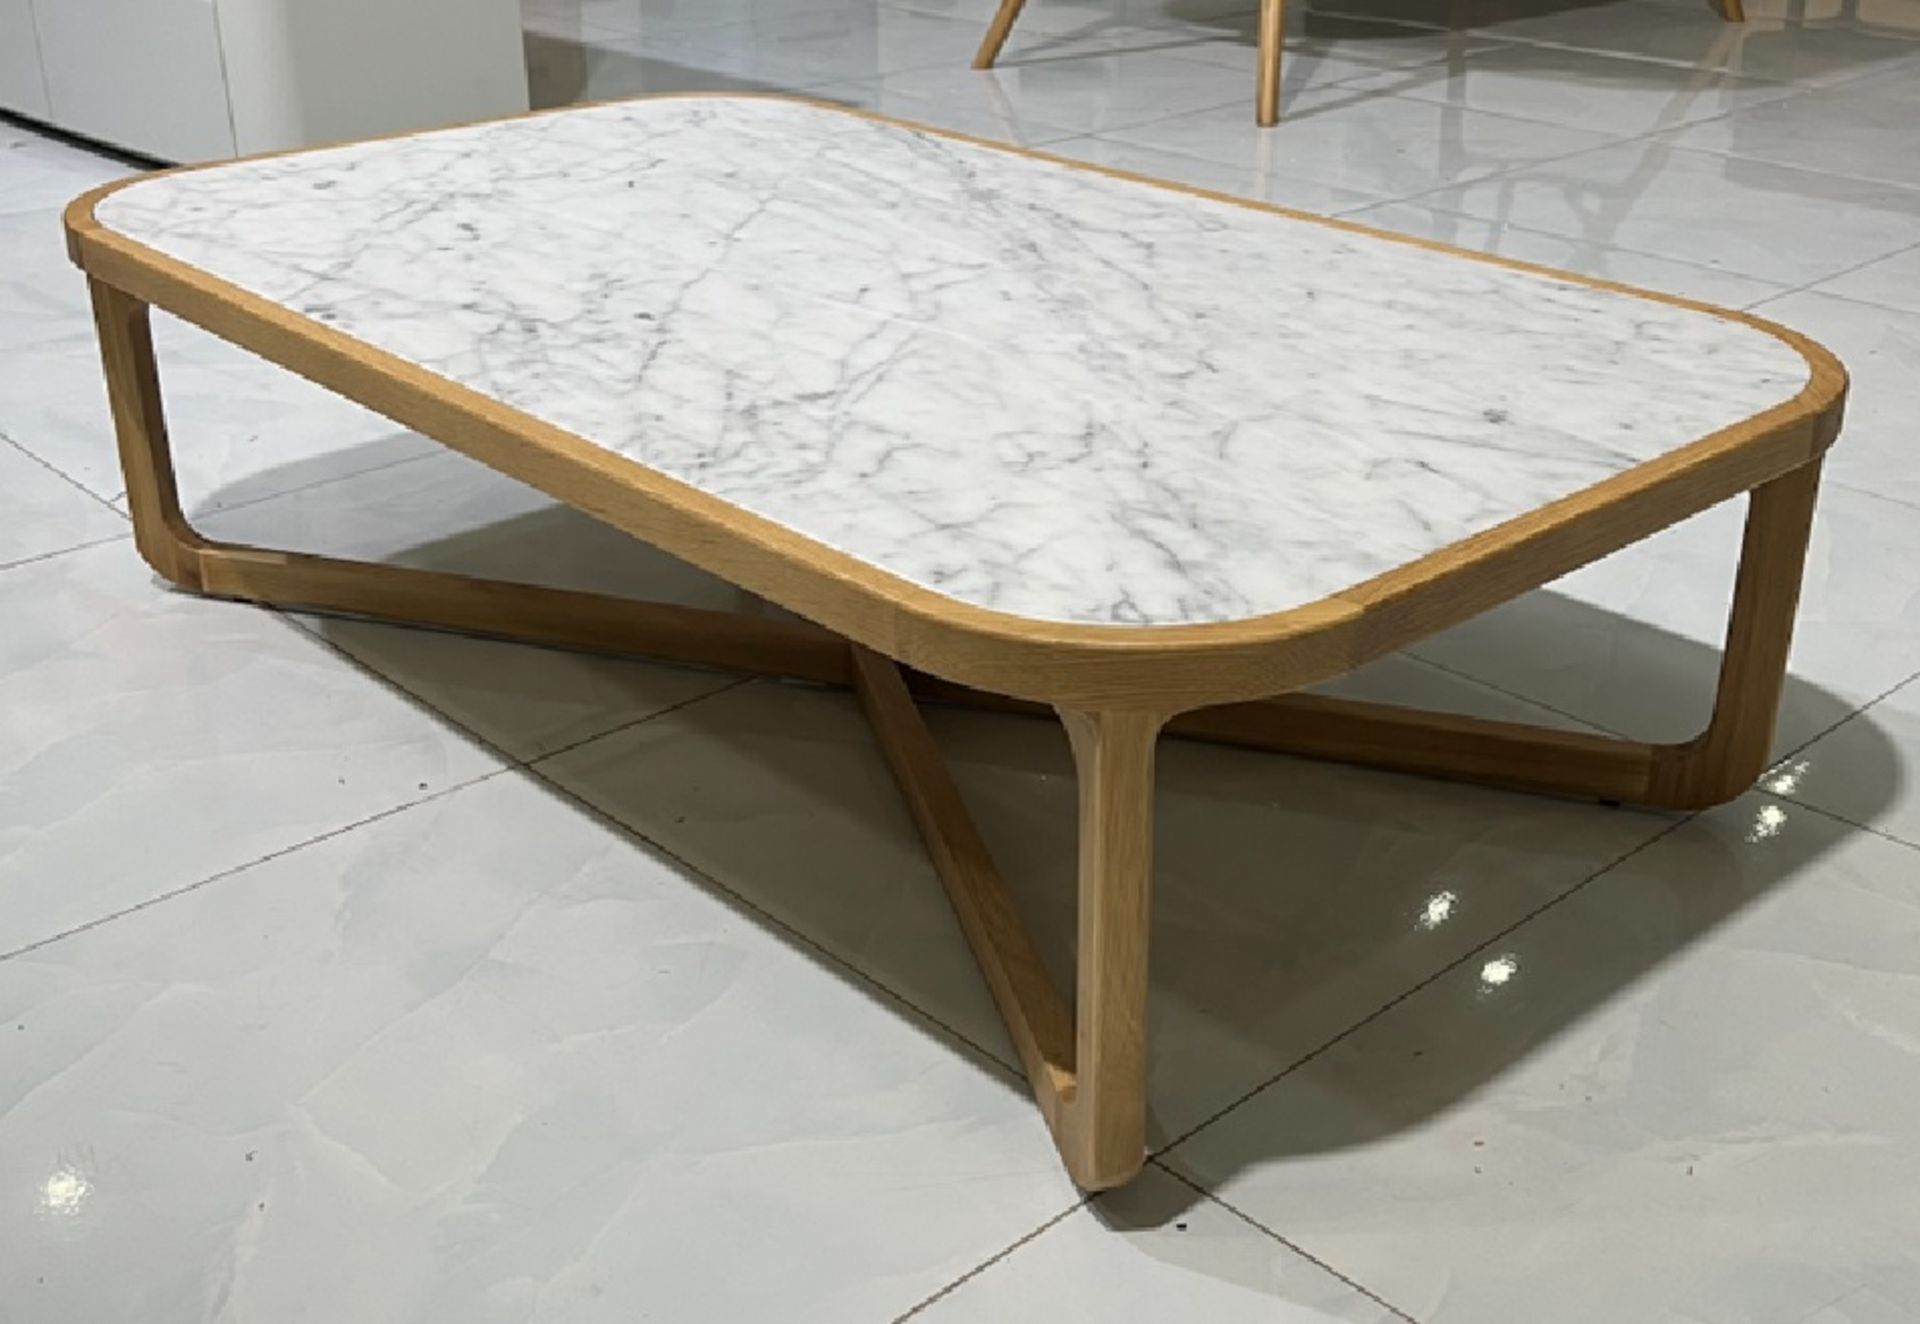 Asher Coffee Table The Asher cocktail table is made of American oak and Italian Carrara marble, with